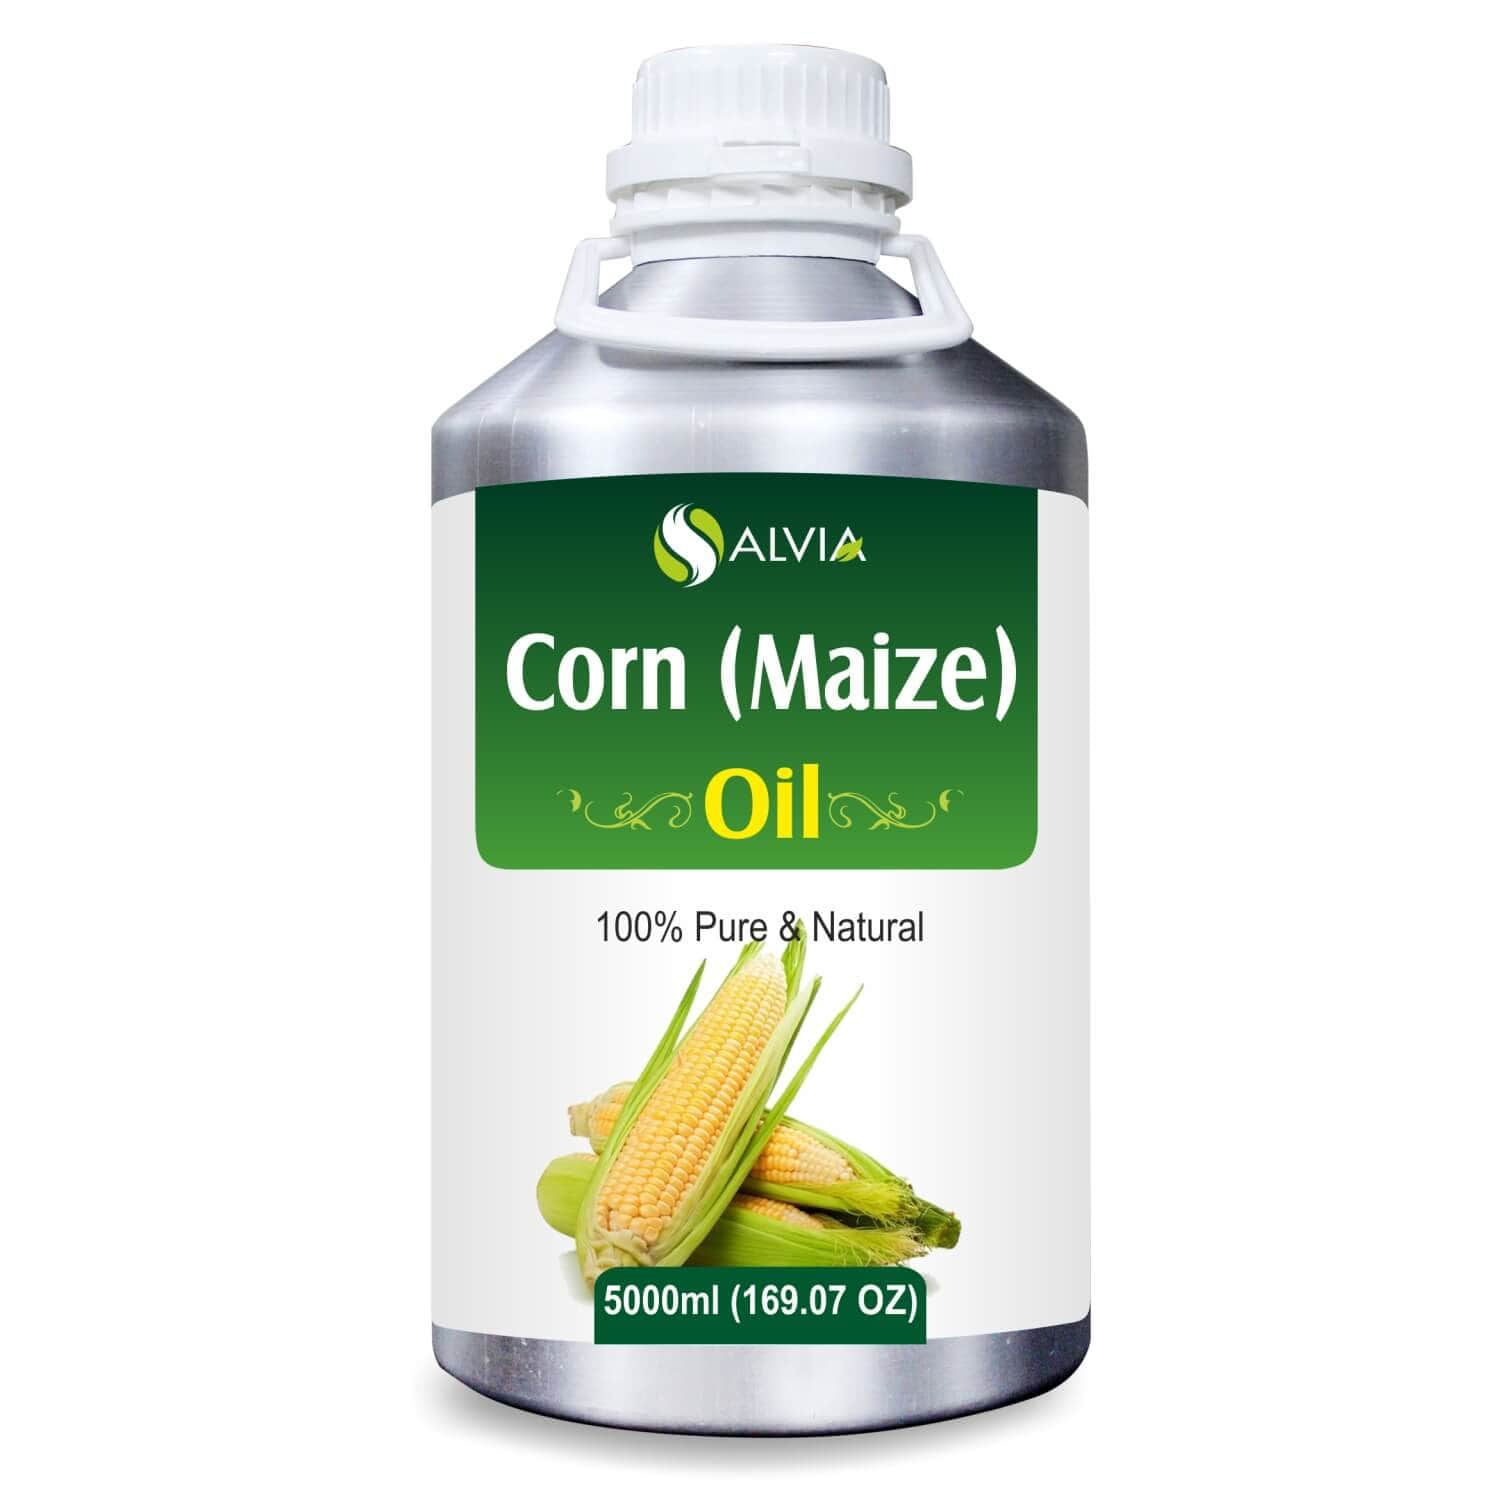 Salvia Natural Carrier Oils 5000ml Corn (Maize) Oil (Zea-Mays) 100% Natural Pure Carrier Oil